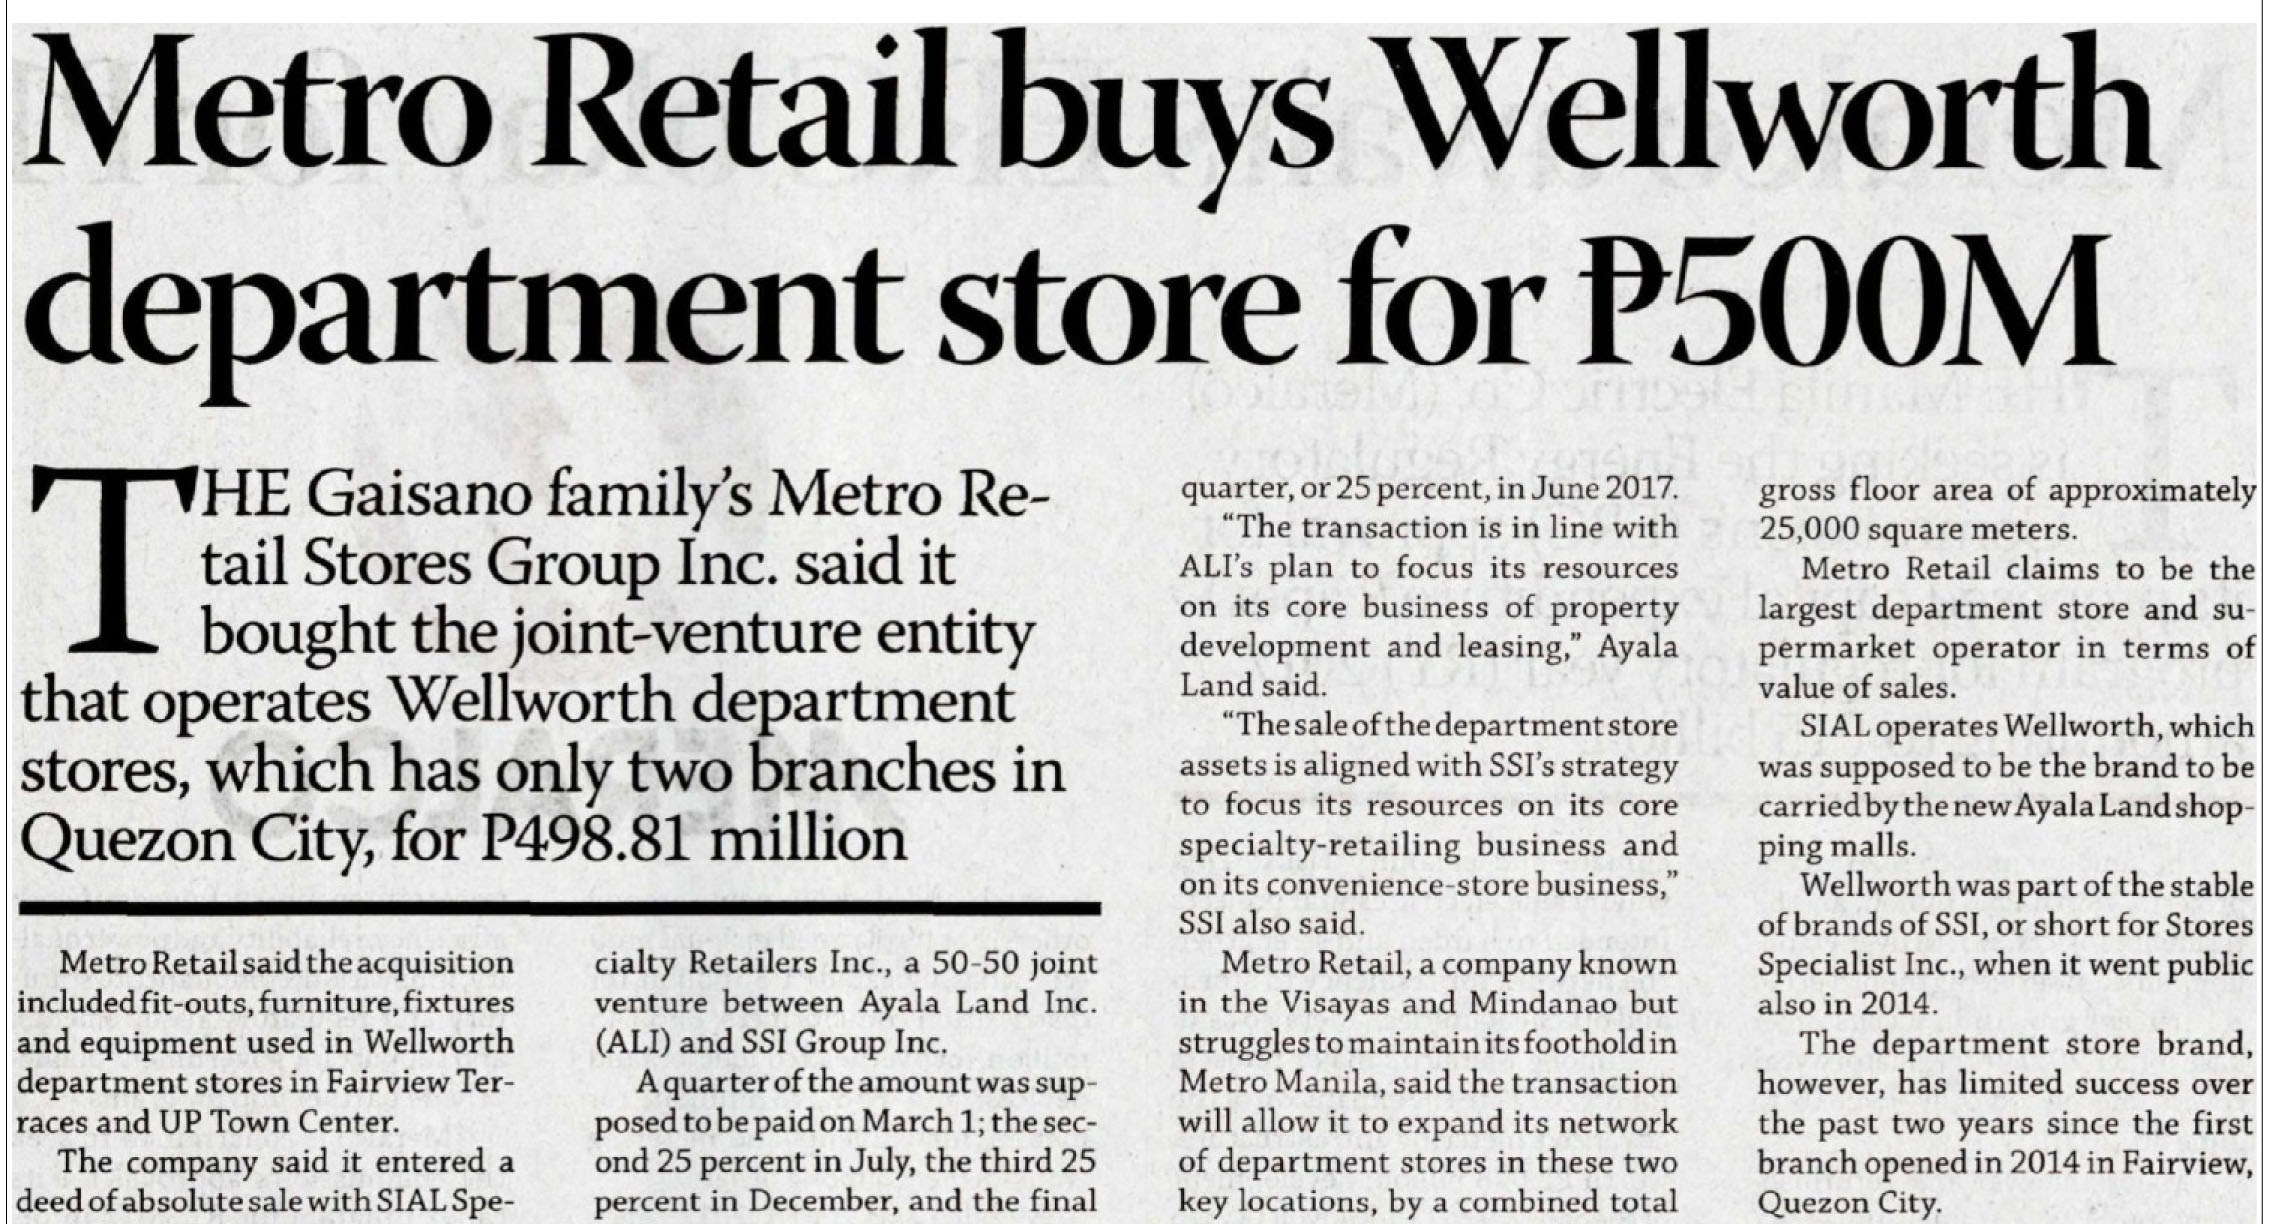 Metro Retail buys Wellworth department store fro P500M Business Mirror